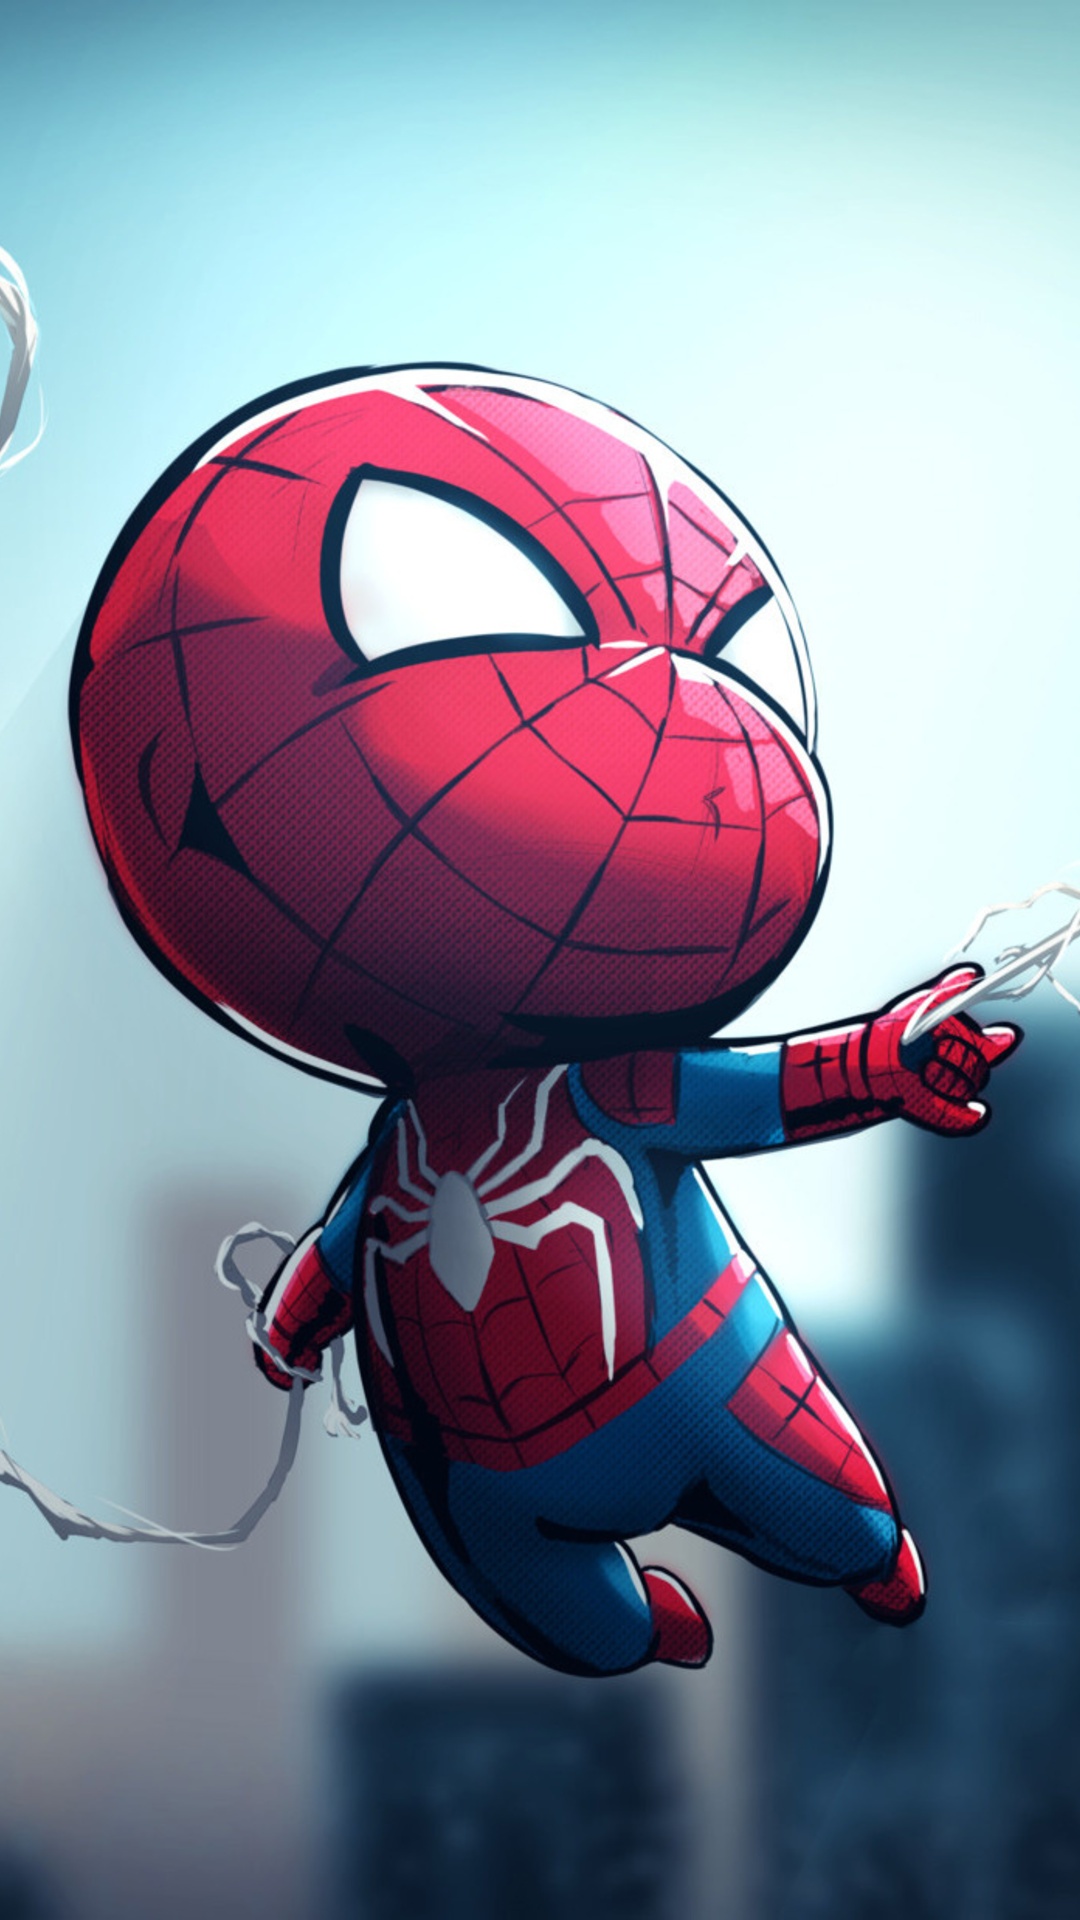 Cute Spiderman Images